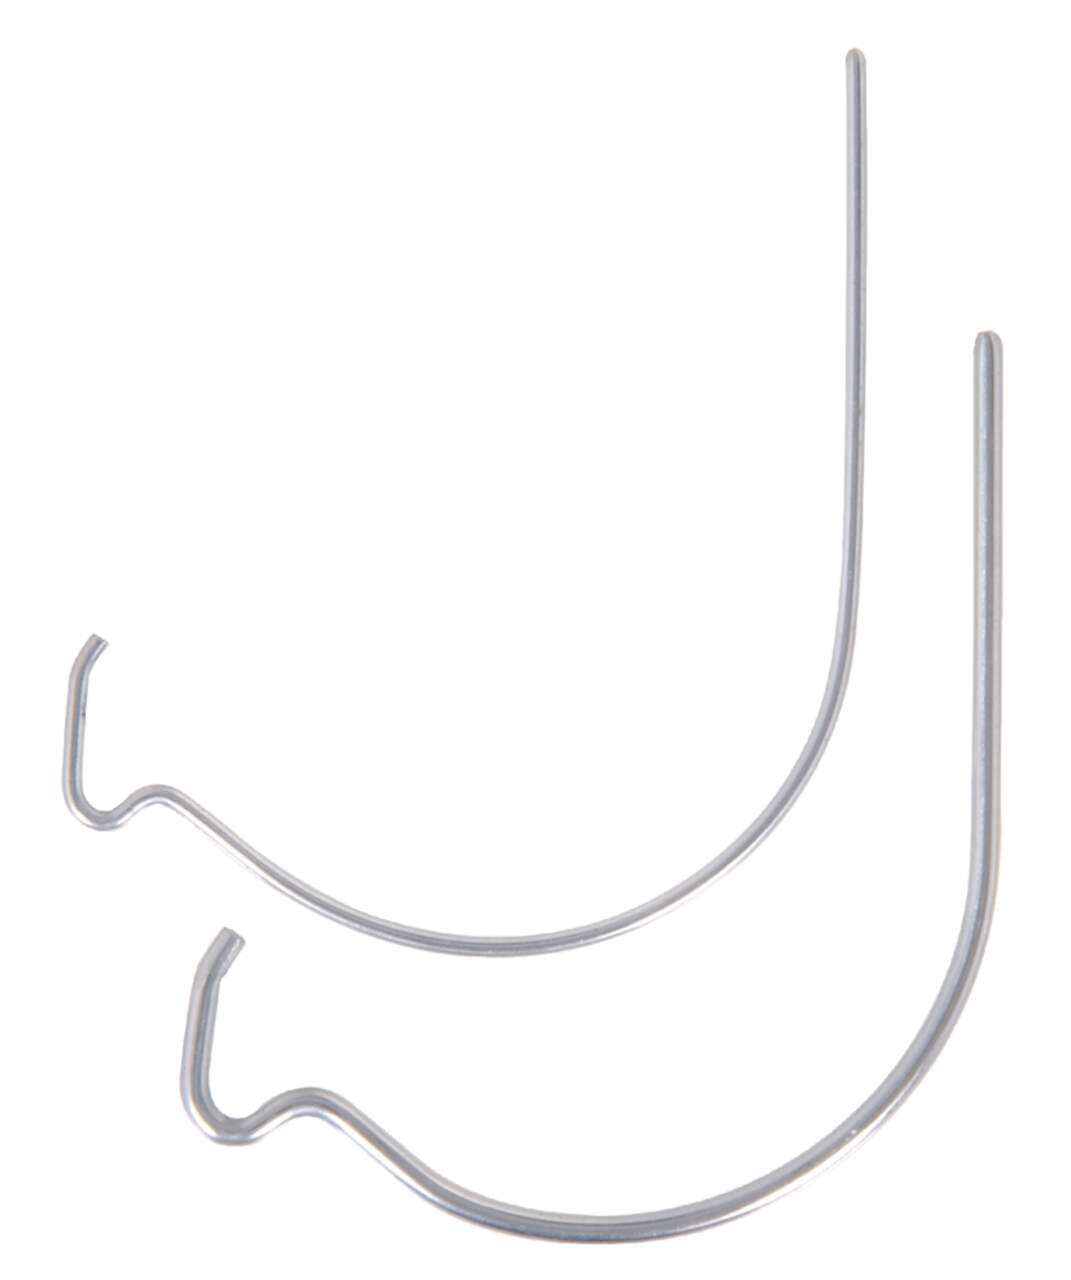 https://media-www.canadiantire.ca/product/fixing/hardware/general-hardware/1610755/monkey-hooks-variety-pack-30-pack-6afdaddc-d426-43a2-8ae6-014bd10943d7.png?imdensity=1&imwidth=640&impolicy=mZoom